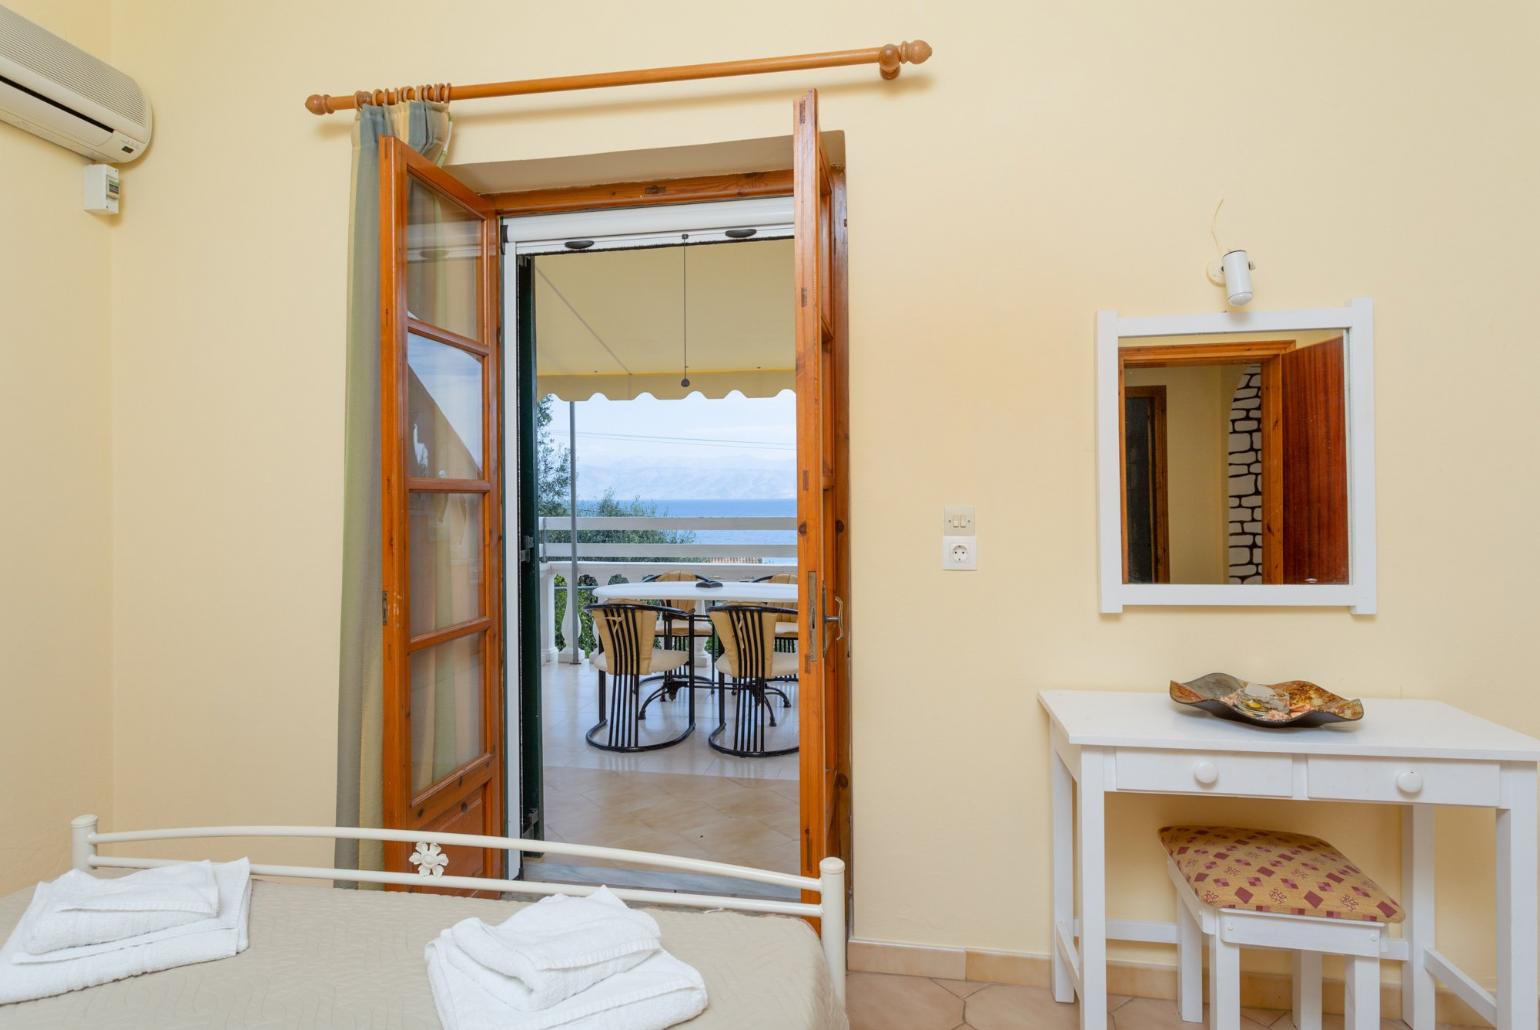 Double bedroom with A/C and terrace access with sea views